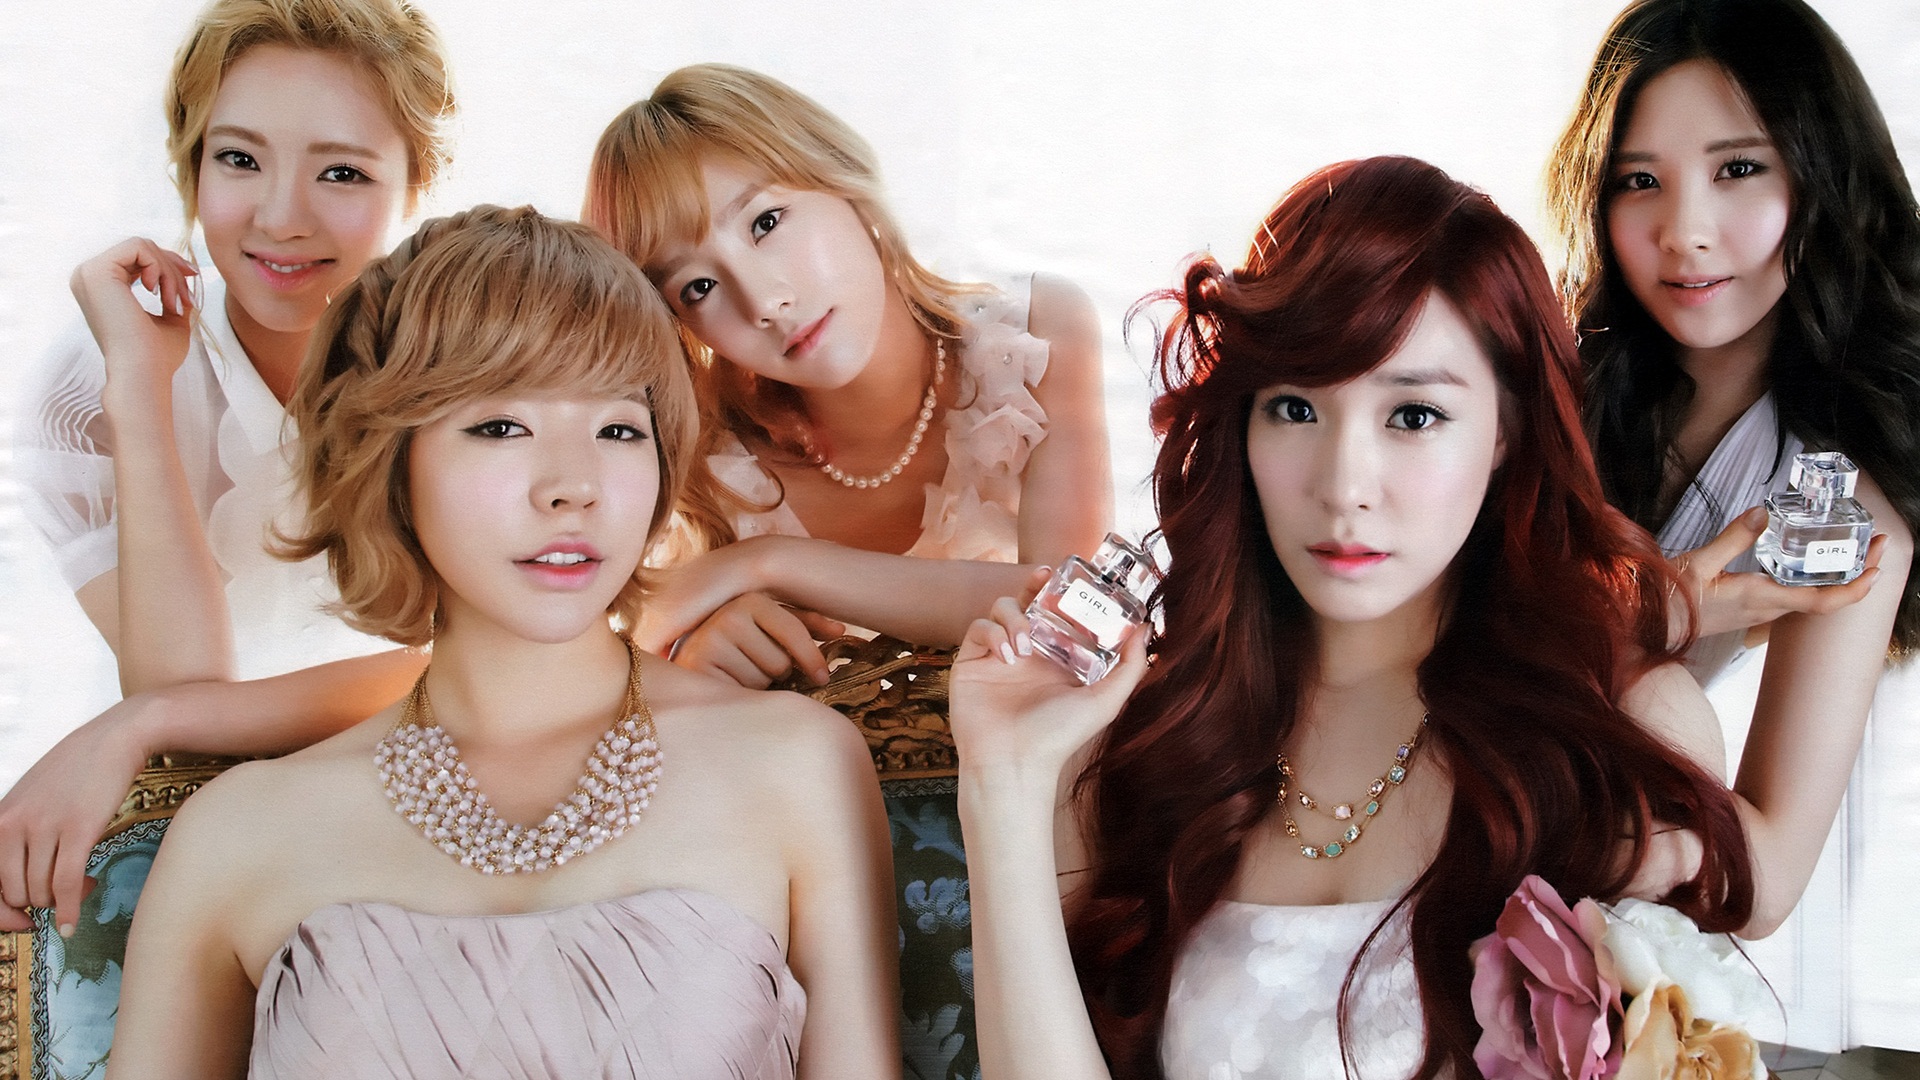 Girls Generation latest HD wallpapers collection #4 - 1920x1080